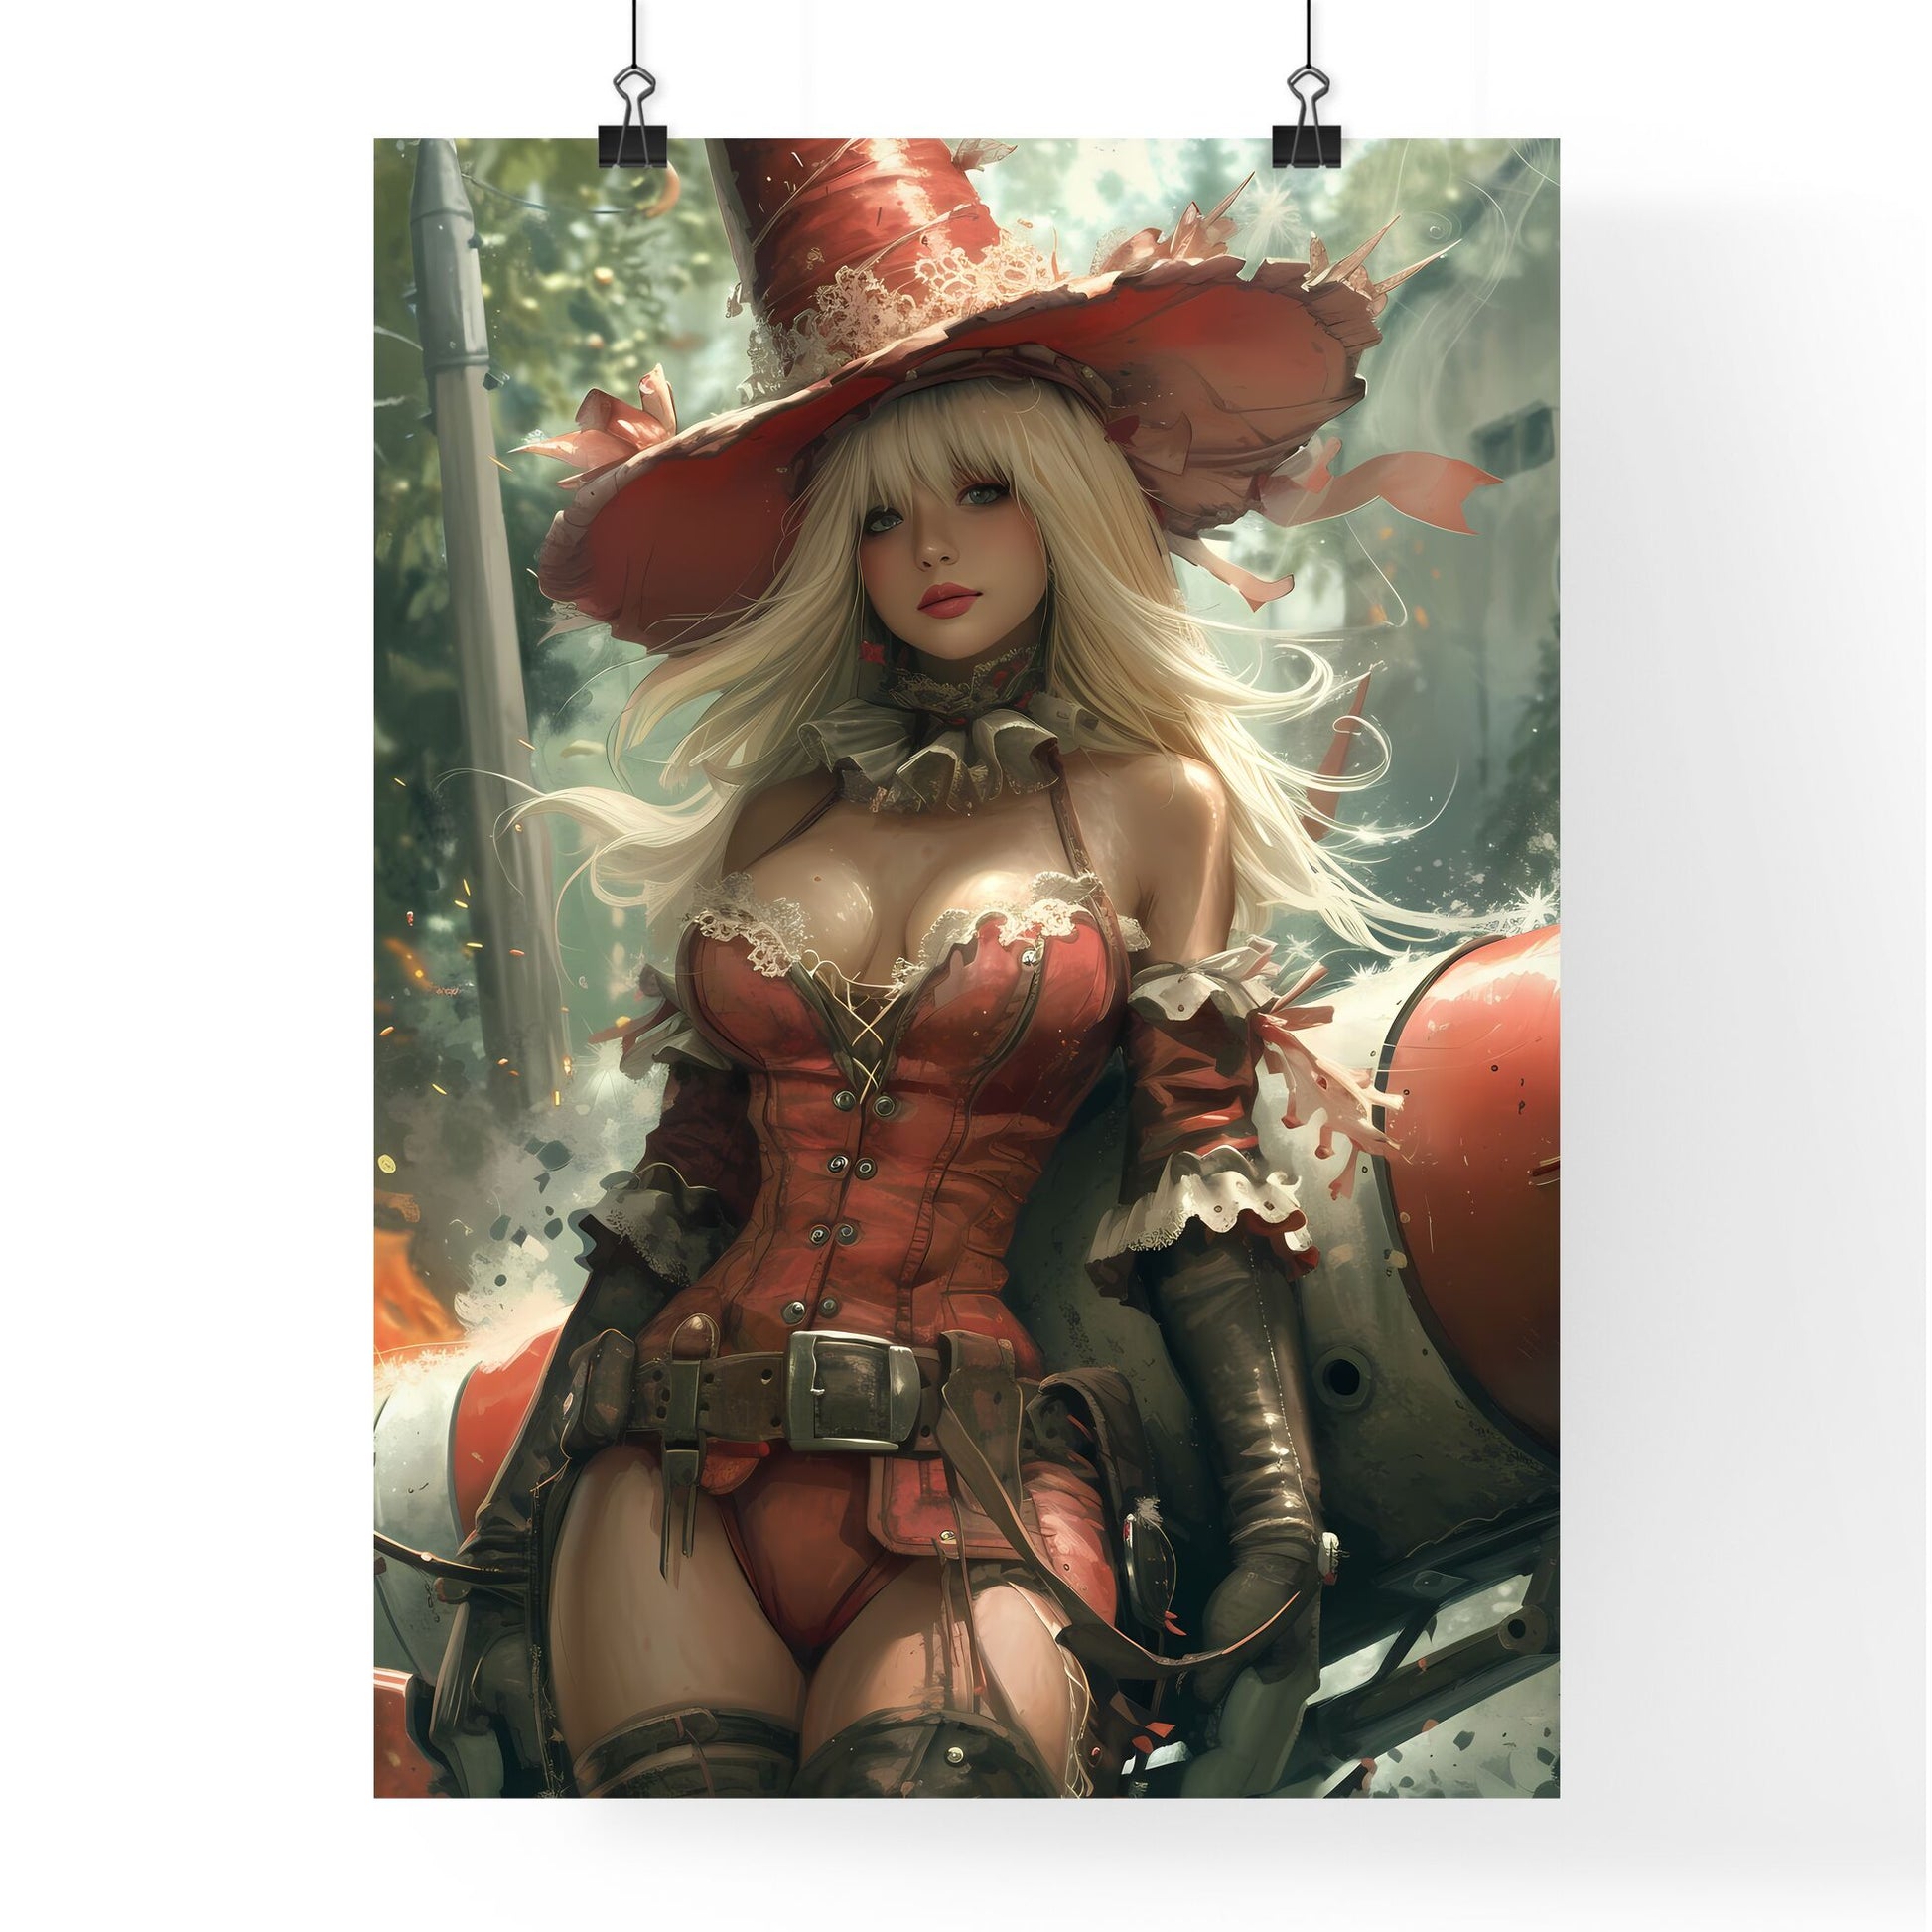 Cowgirl riding a rocket - Art print of a woman wearing a red outfit and hat Default Title